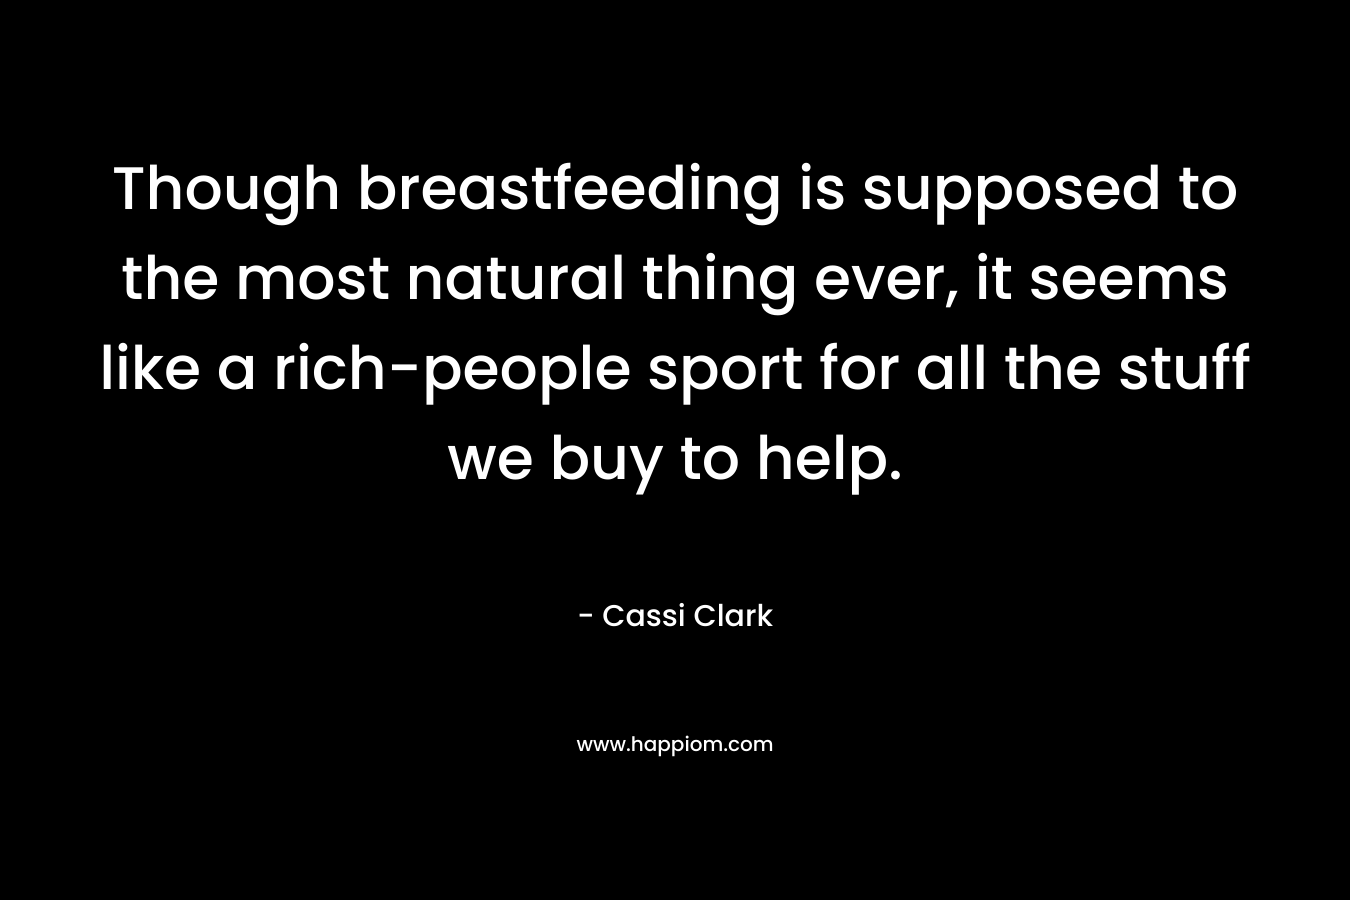 Though breastfeeding is supposed to the most natural thing ever, it seems like a rich-people sport for all the stuff we buy to help. – Cassi Clark